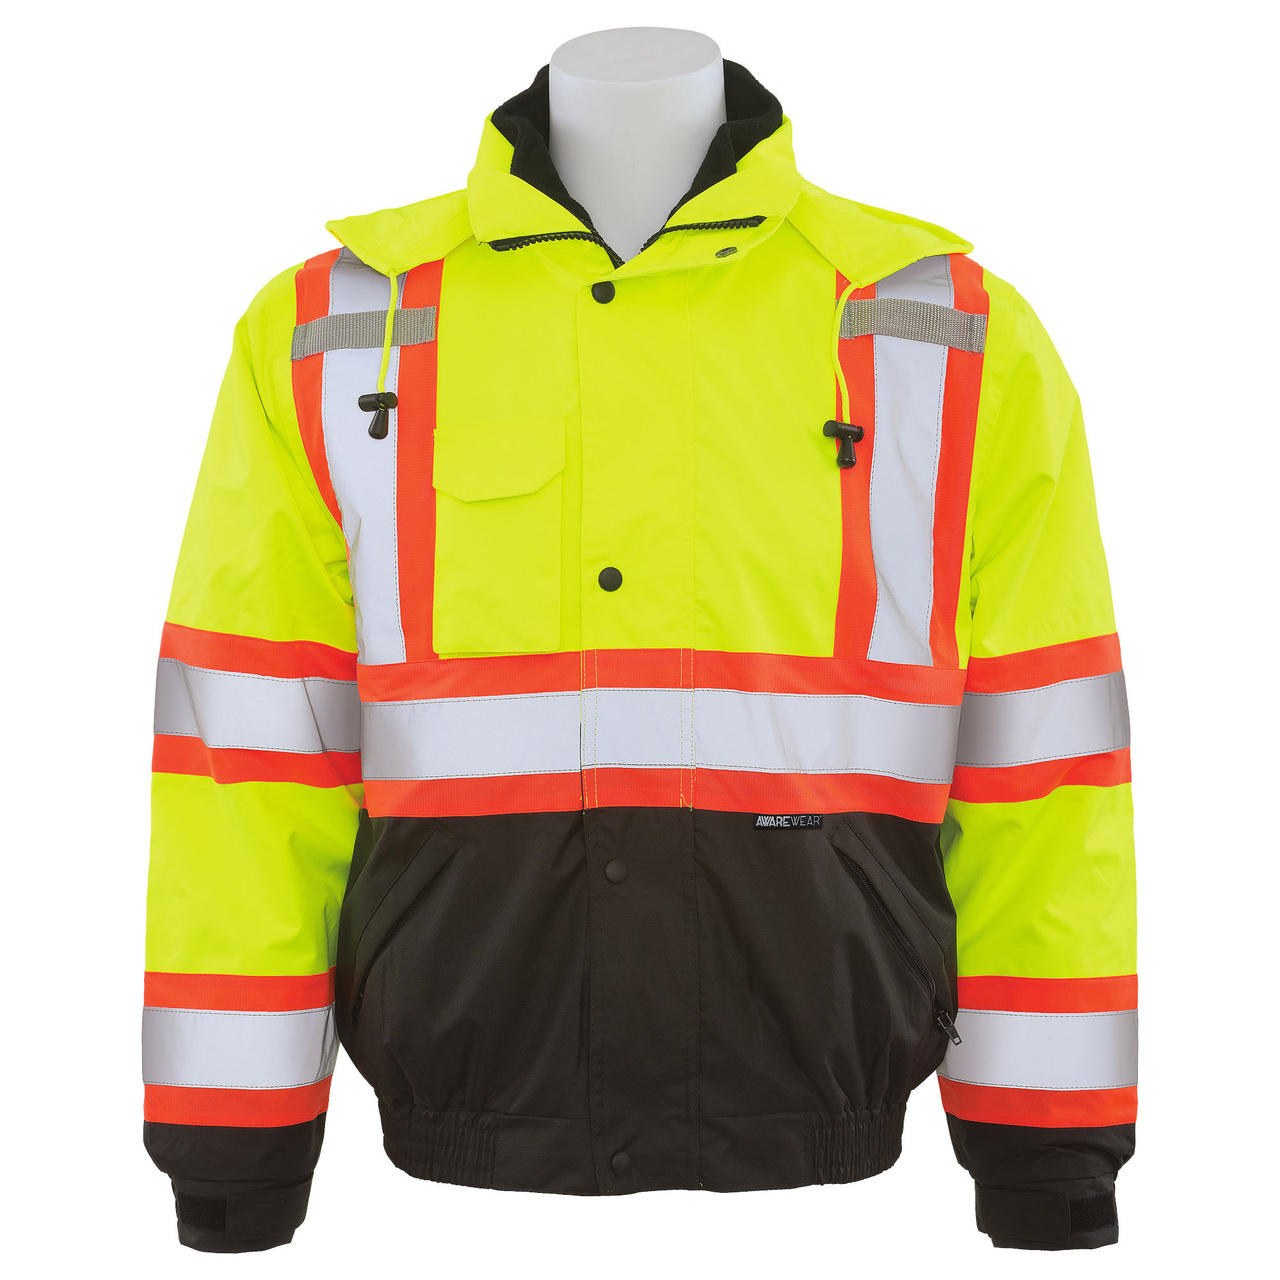 ERB Safety Class 3 Safety Coat 3 in 1 | Chas. E. Phipps